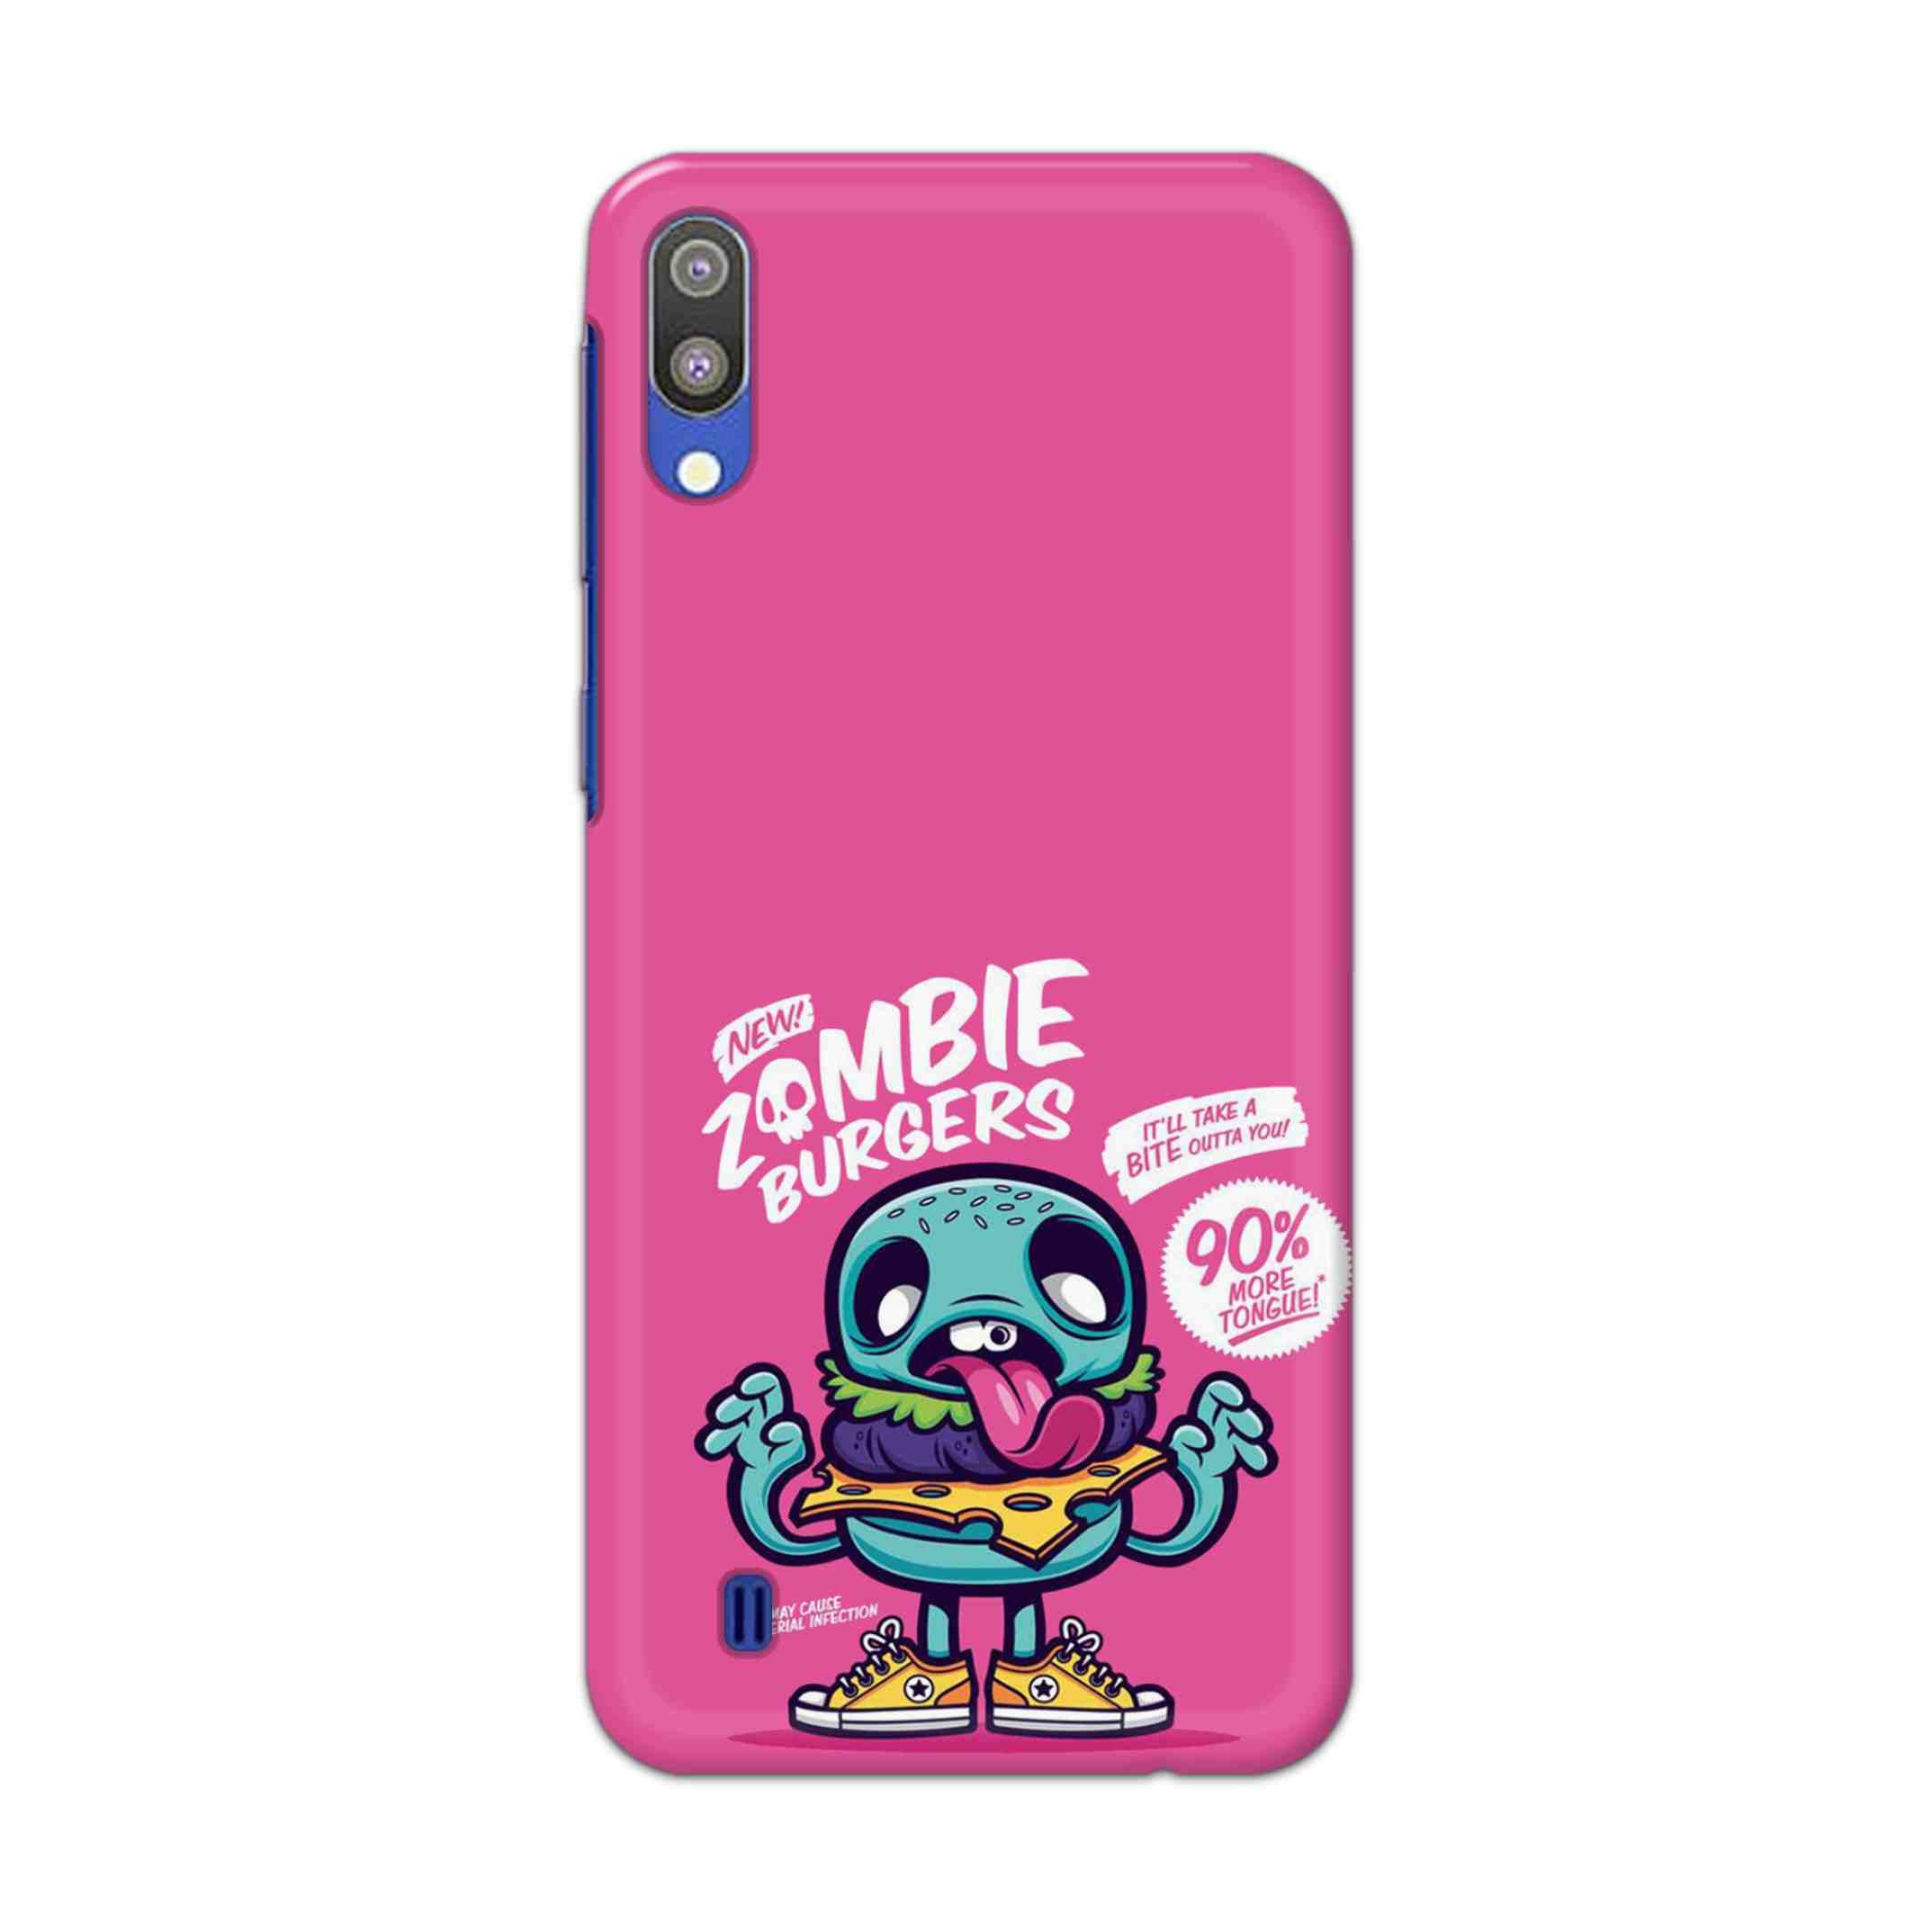 Buy New Zombie Burgers Hard Back Mobile Phone Case Cover For Samsung Galaxy M10 Online